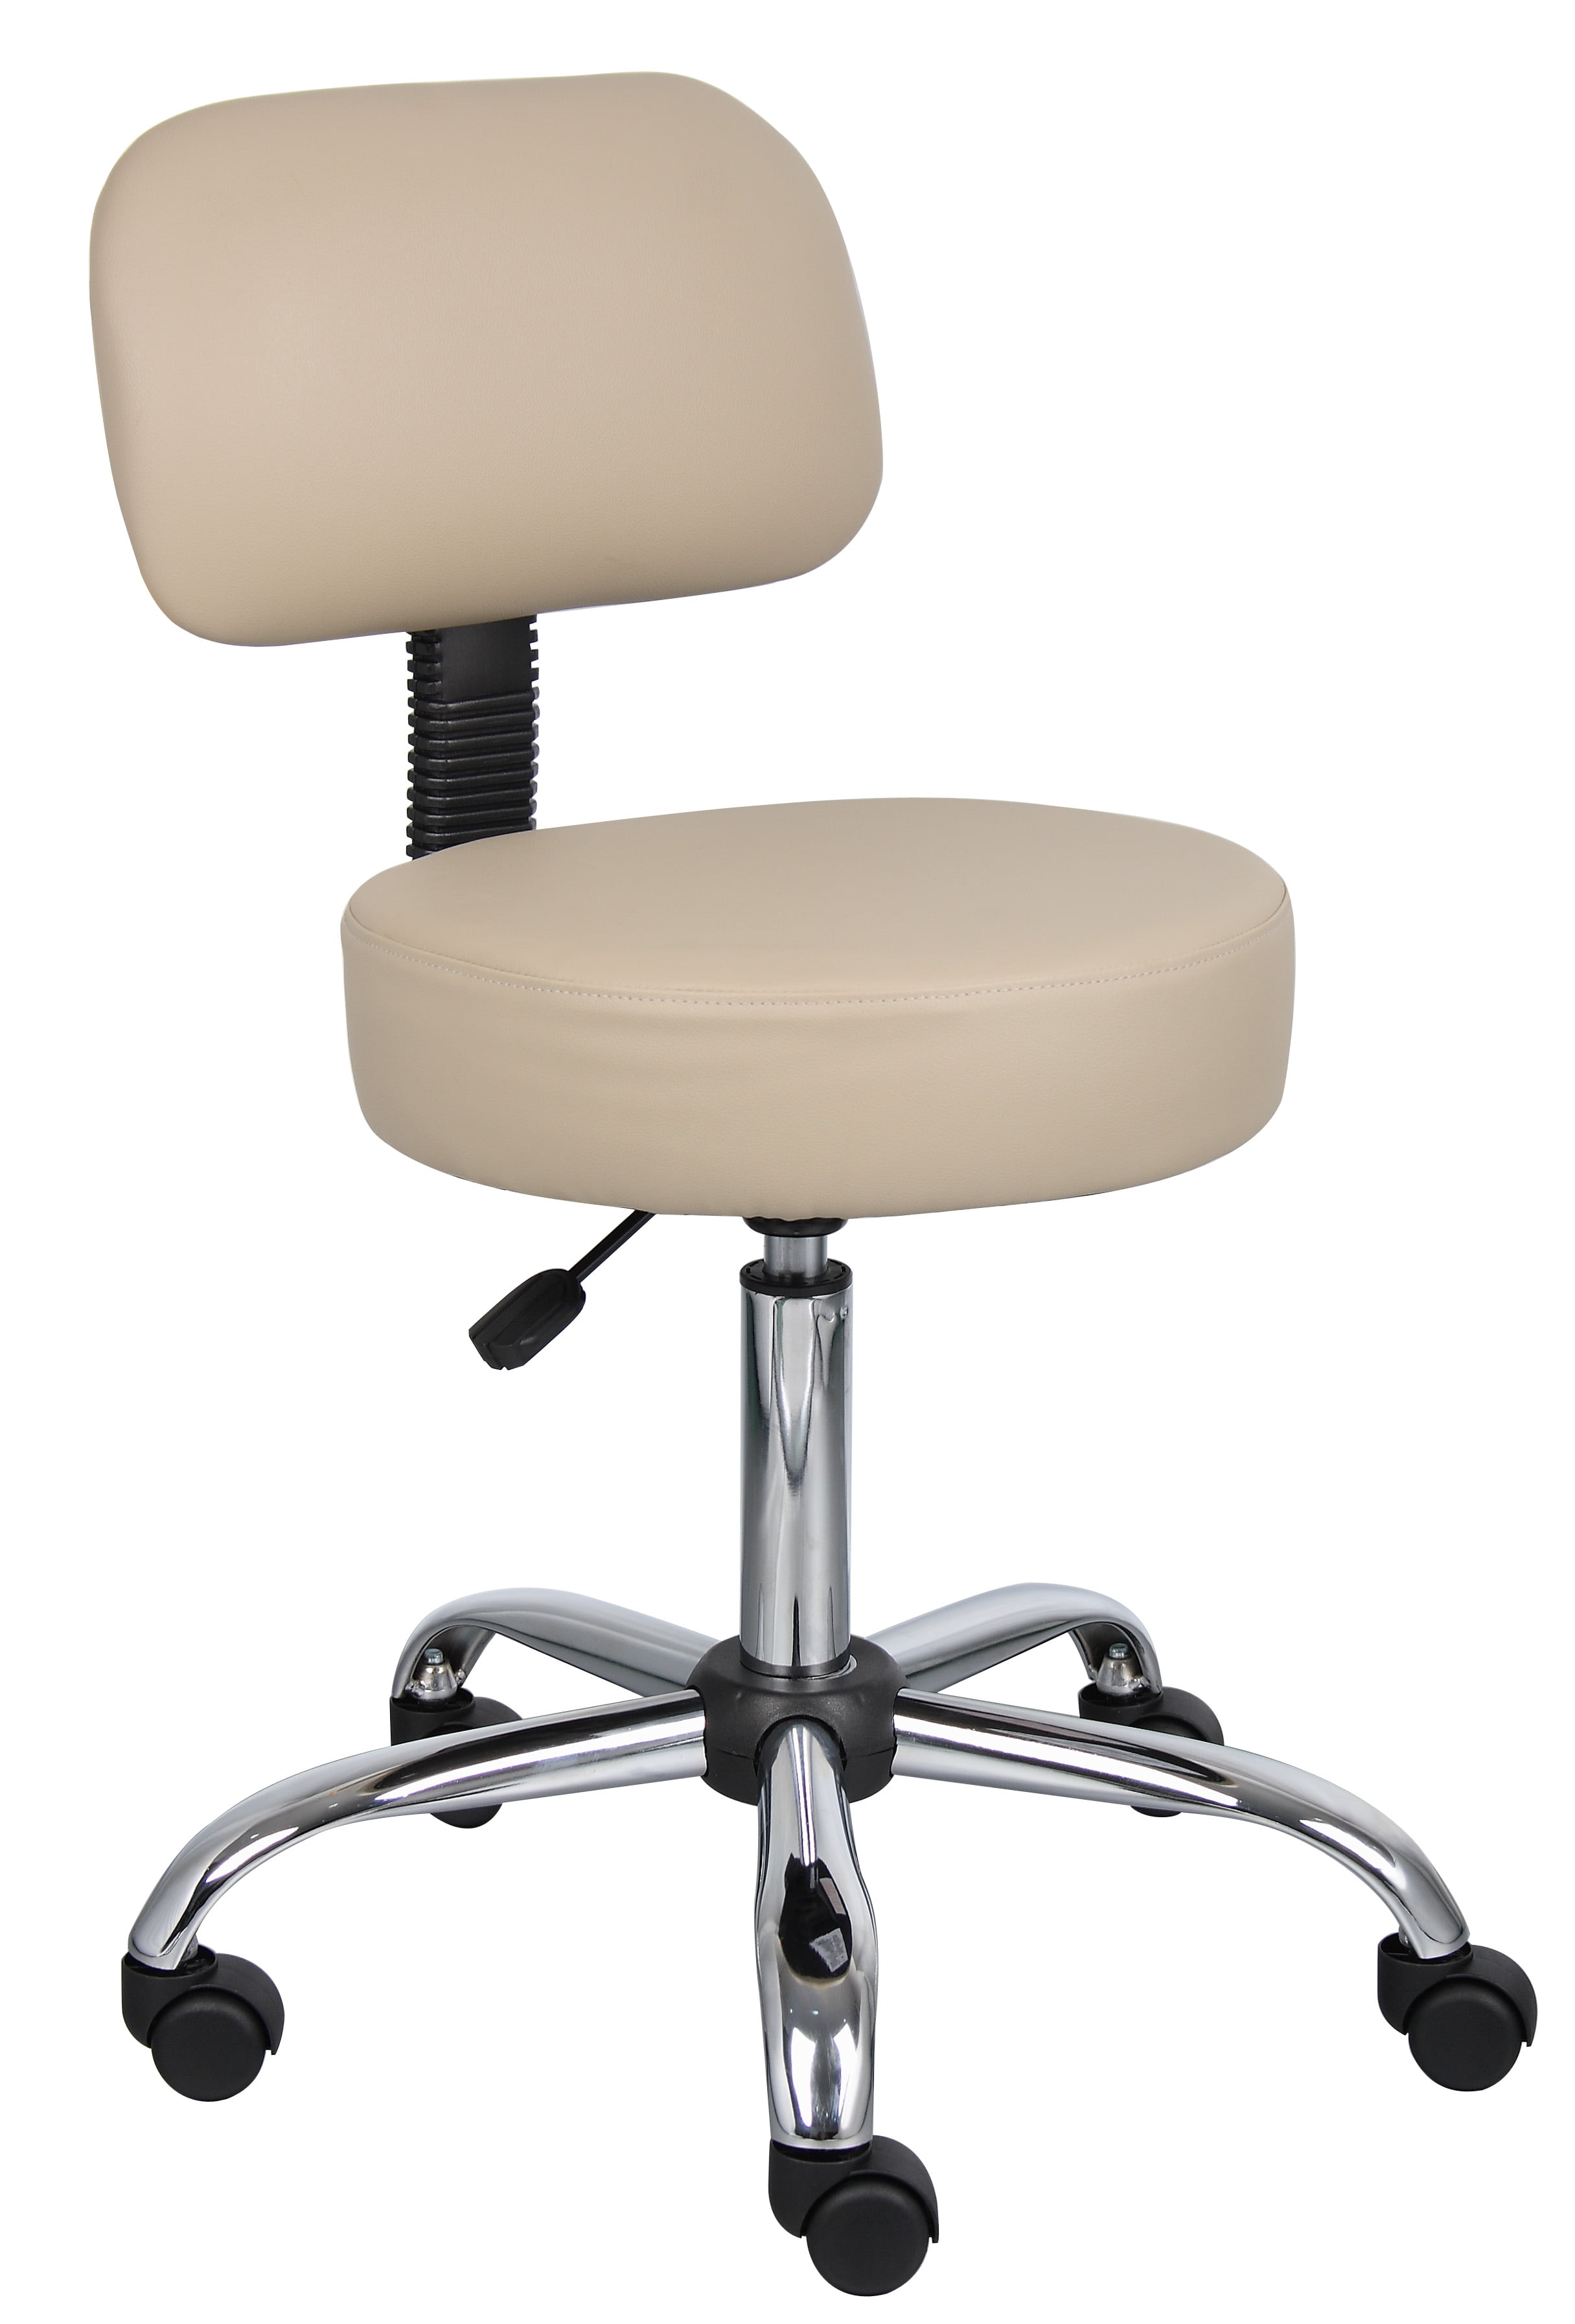 Boss Office Black Caressoft Medical & Spa Stool Chair for sale online 